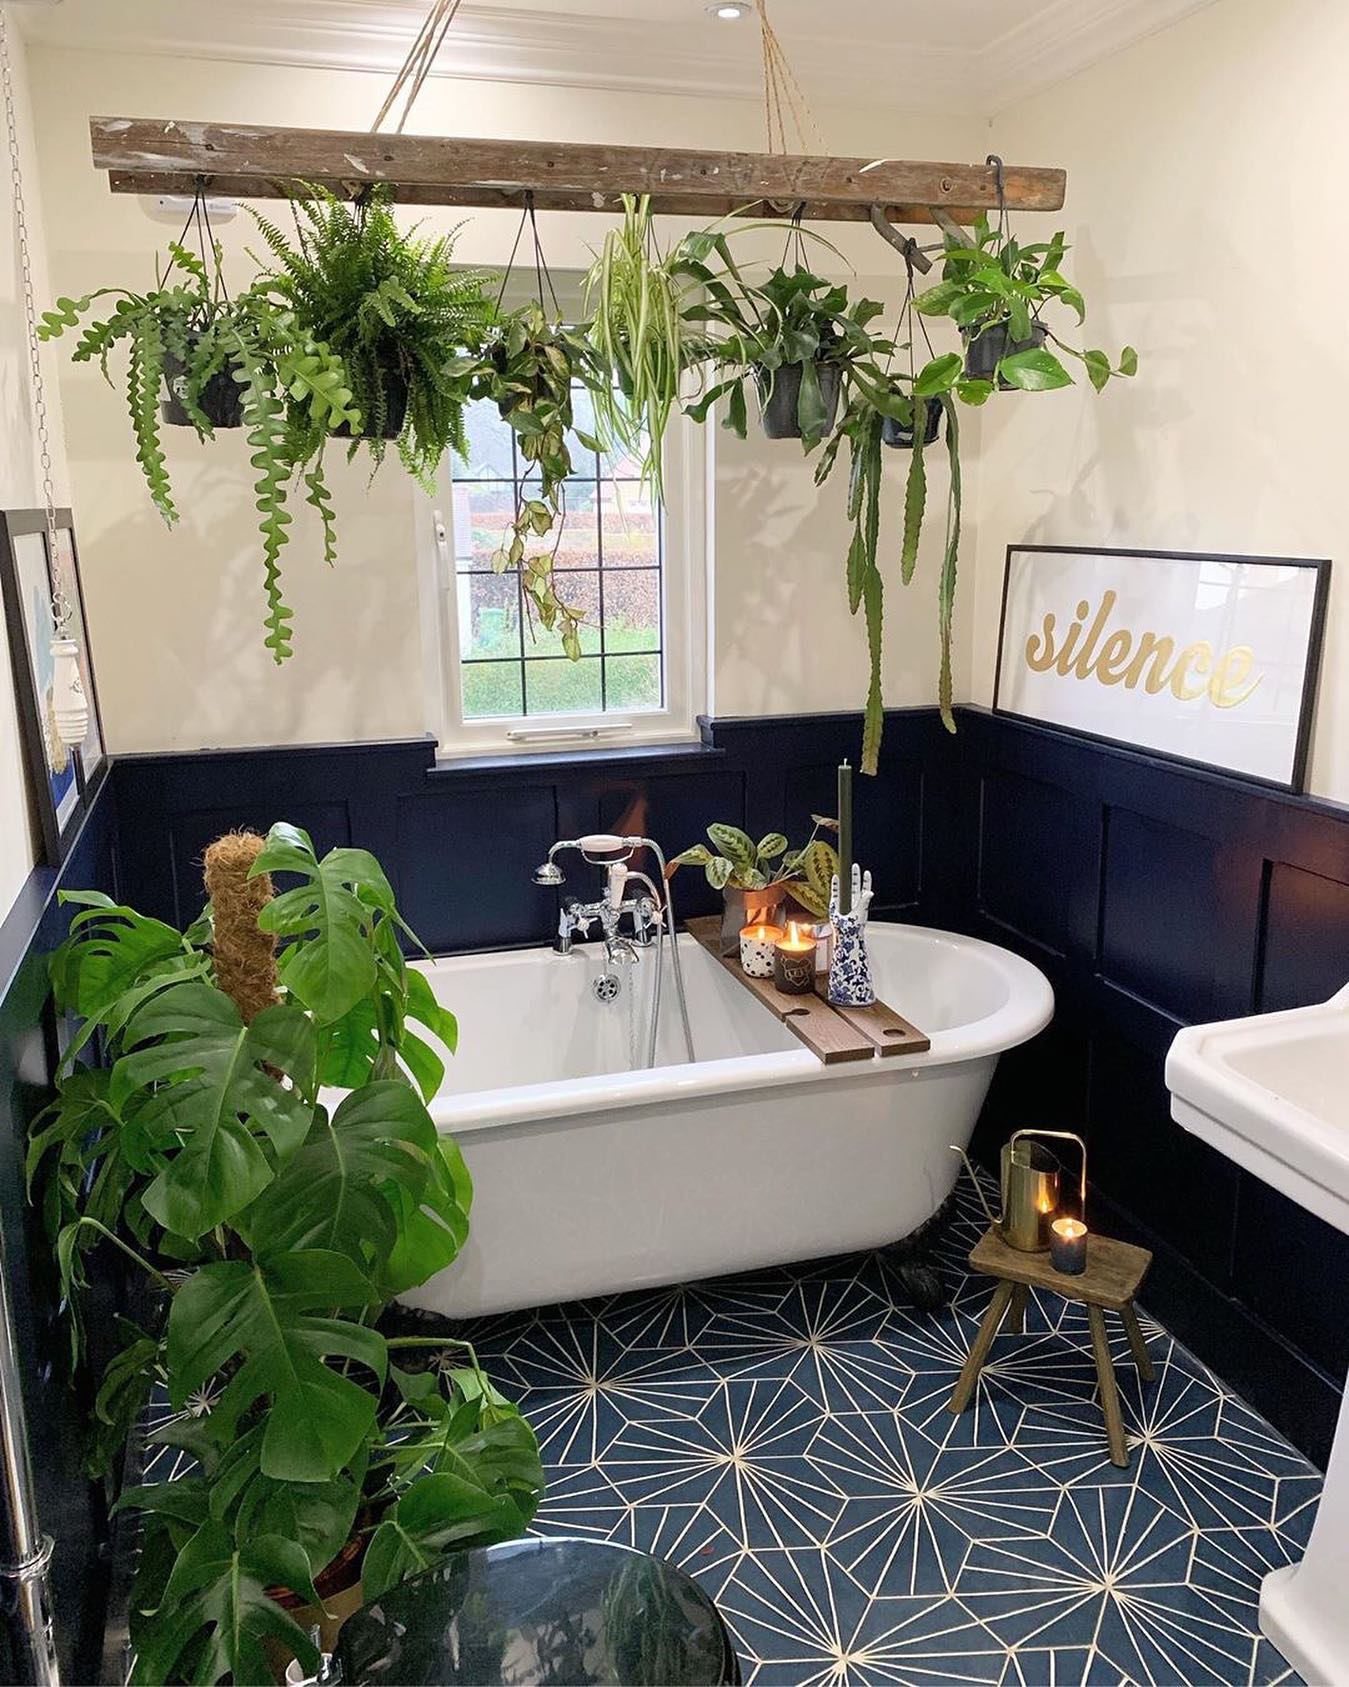 a ceiling mounted repurposed wooden ladder to hang green plants from free up valuable floor space in a tight bathroom like this one